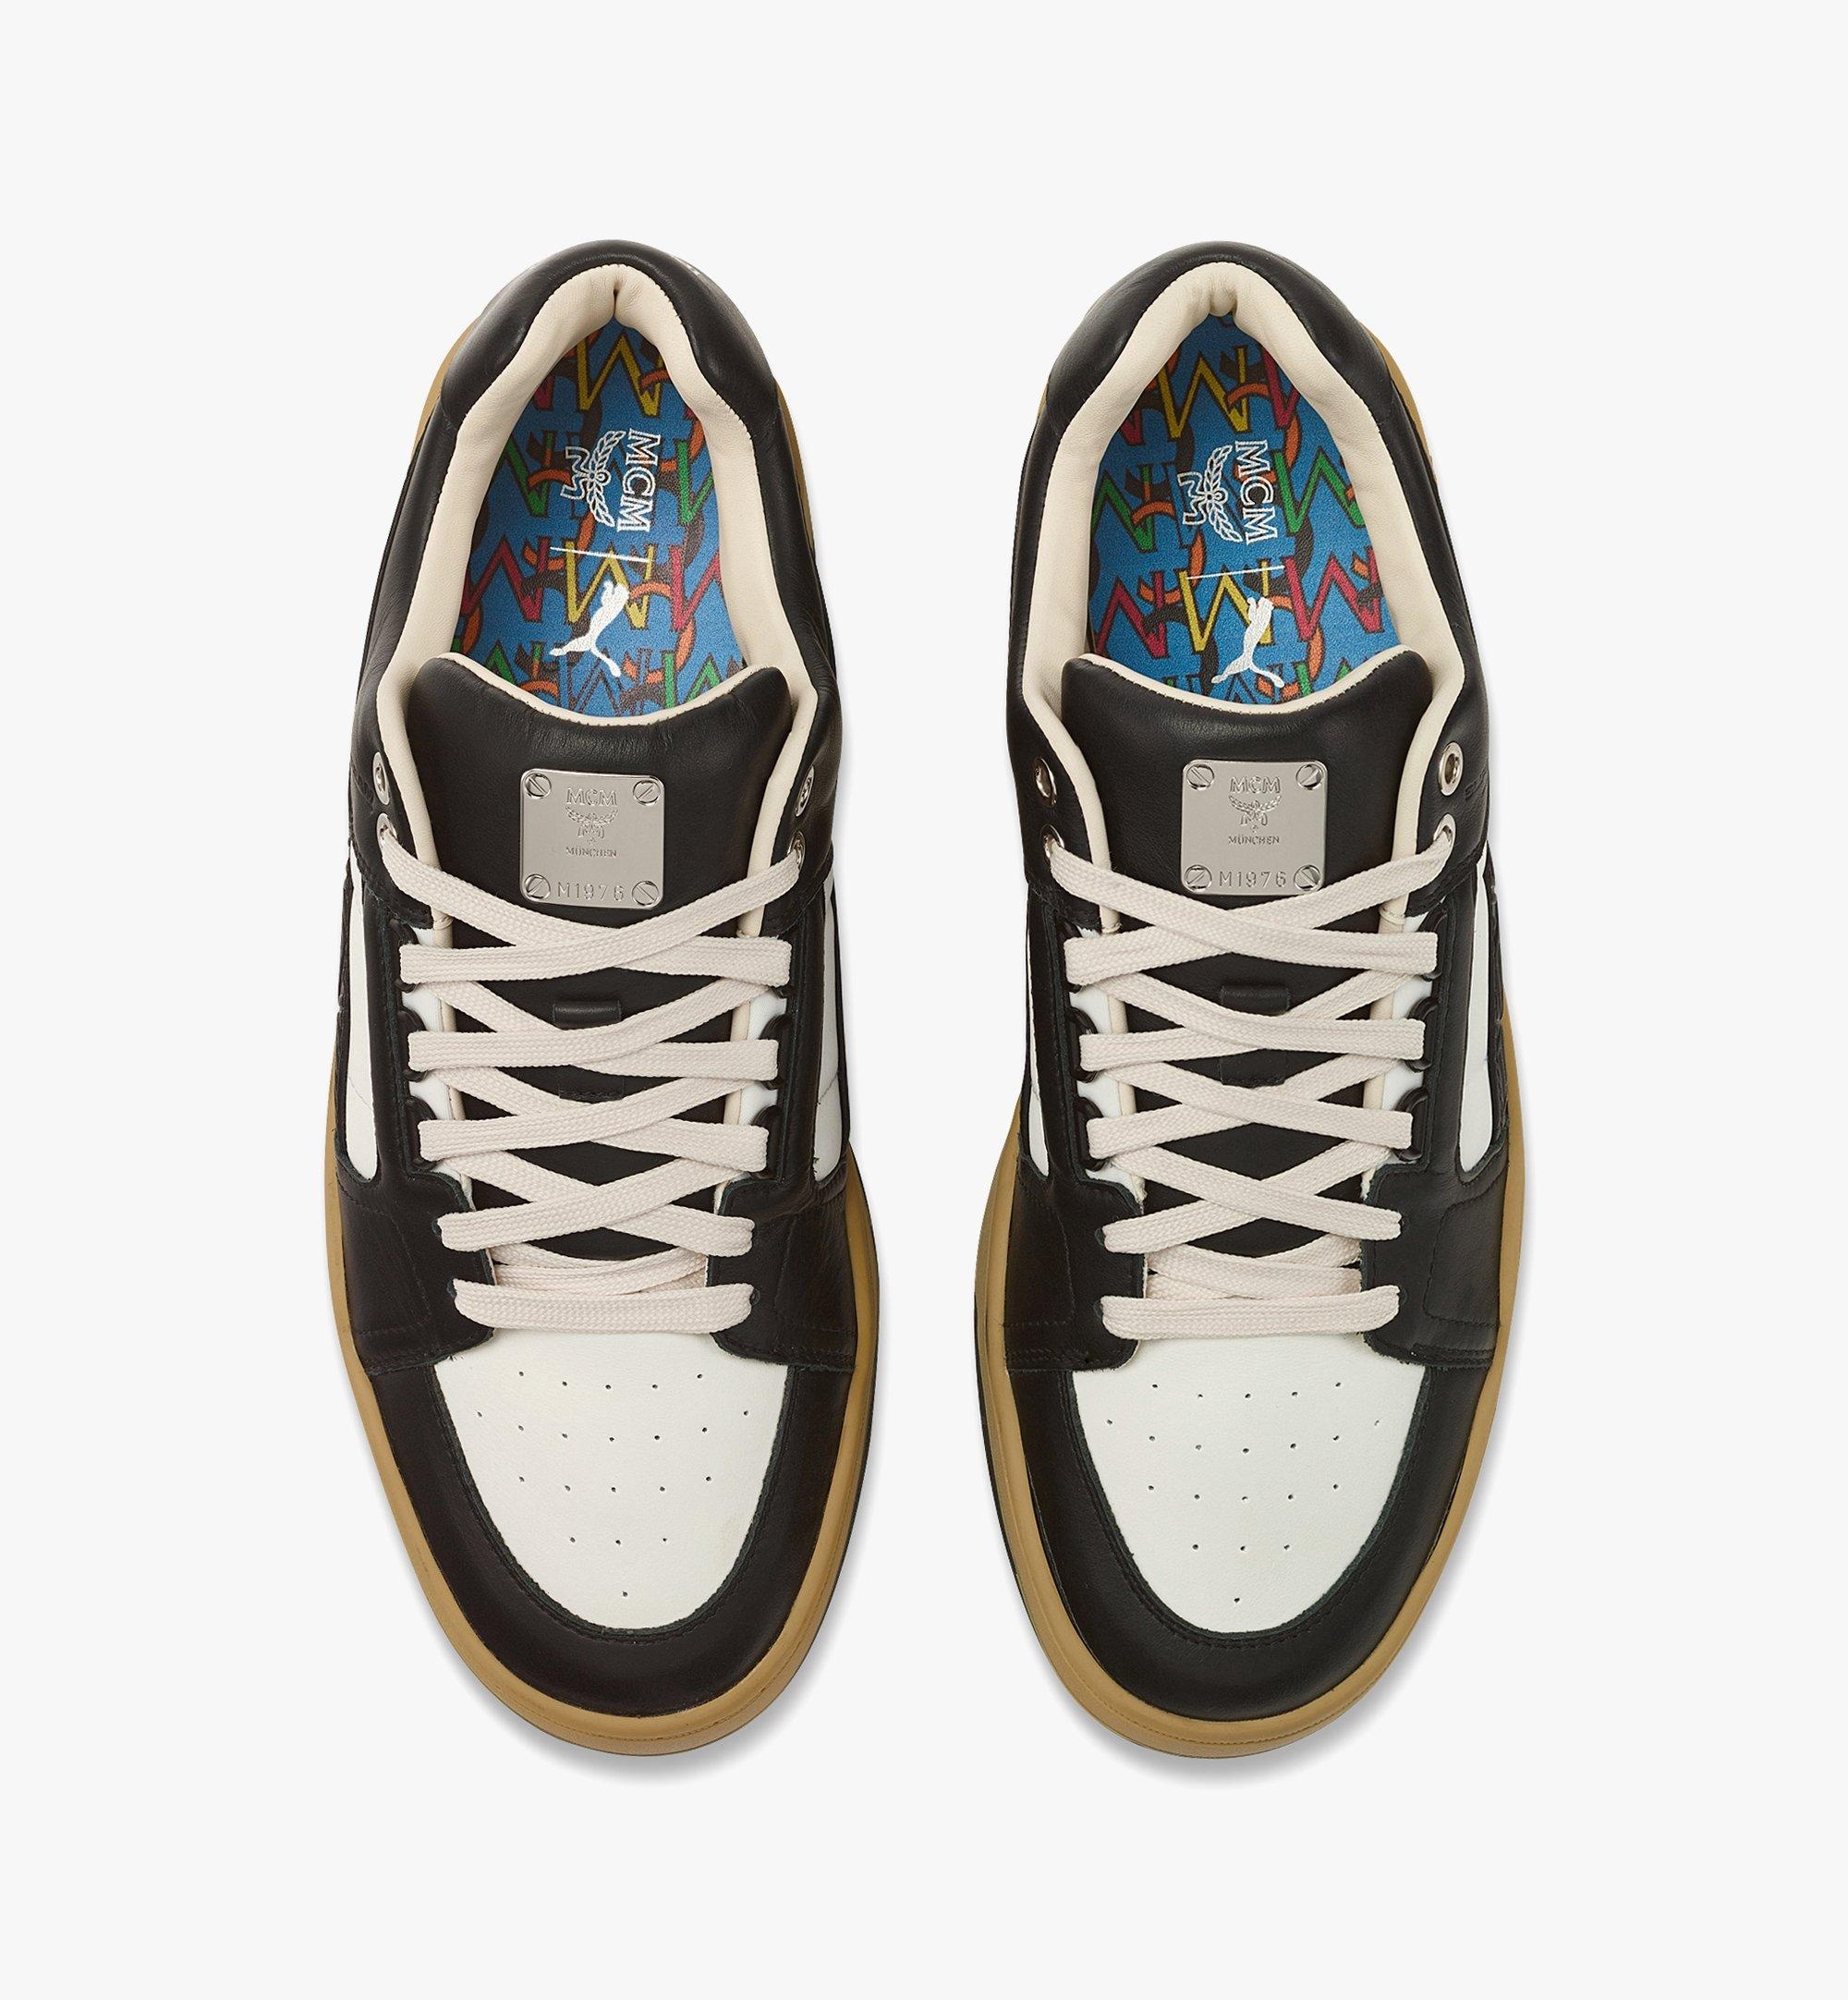 MCM x PUMA Slipstream Sneakers in Cubic Leather - 6